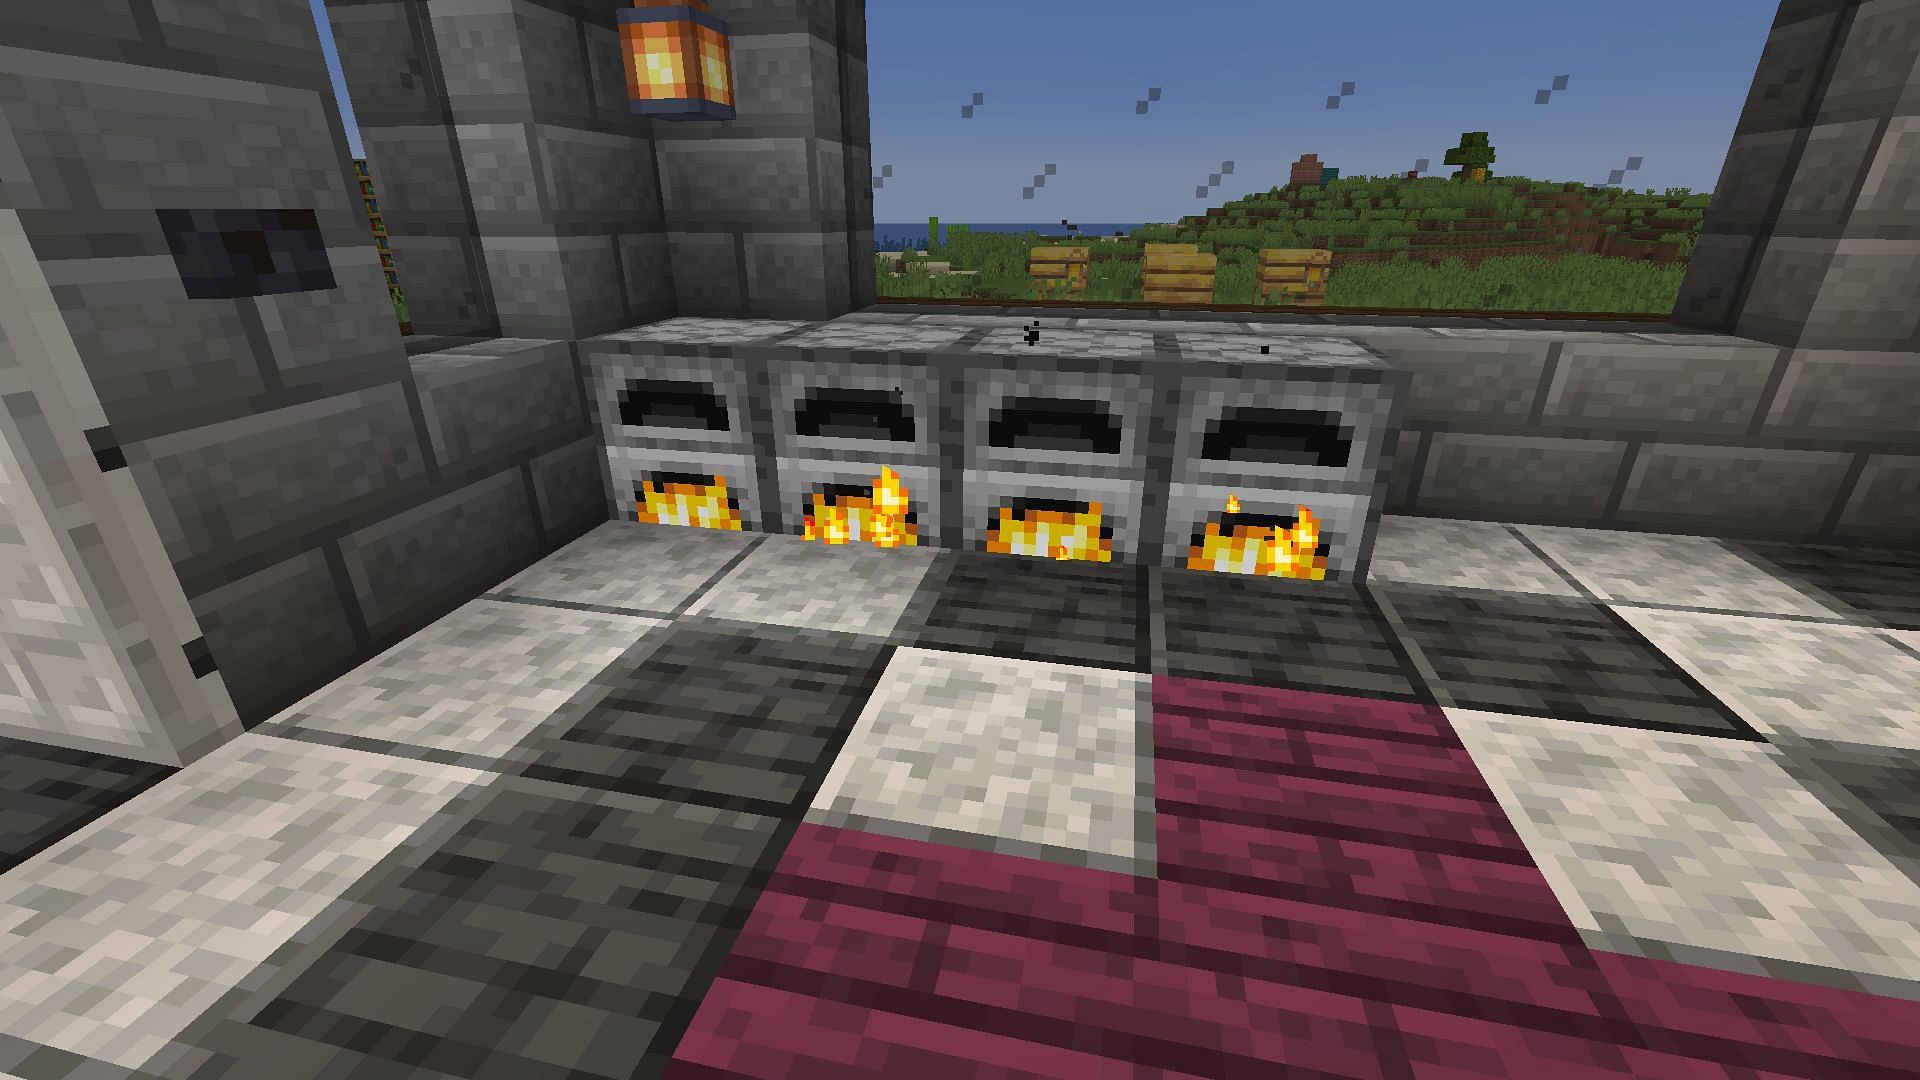 Furnaces burning, one of the things reliant on simulation distance (Image via Minecraft)